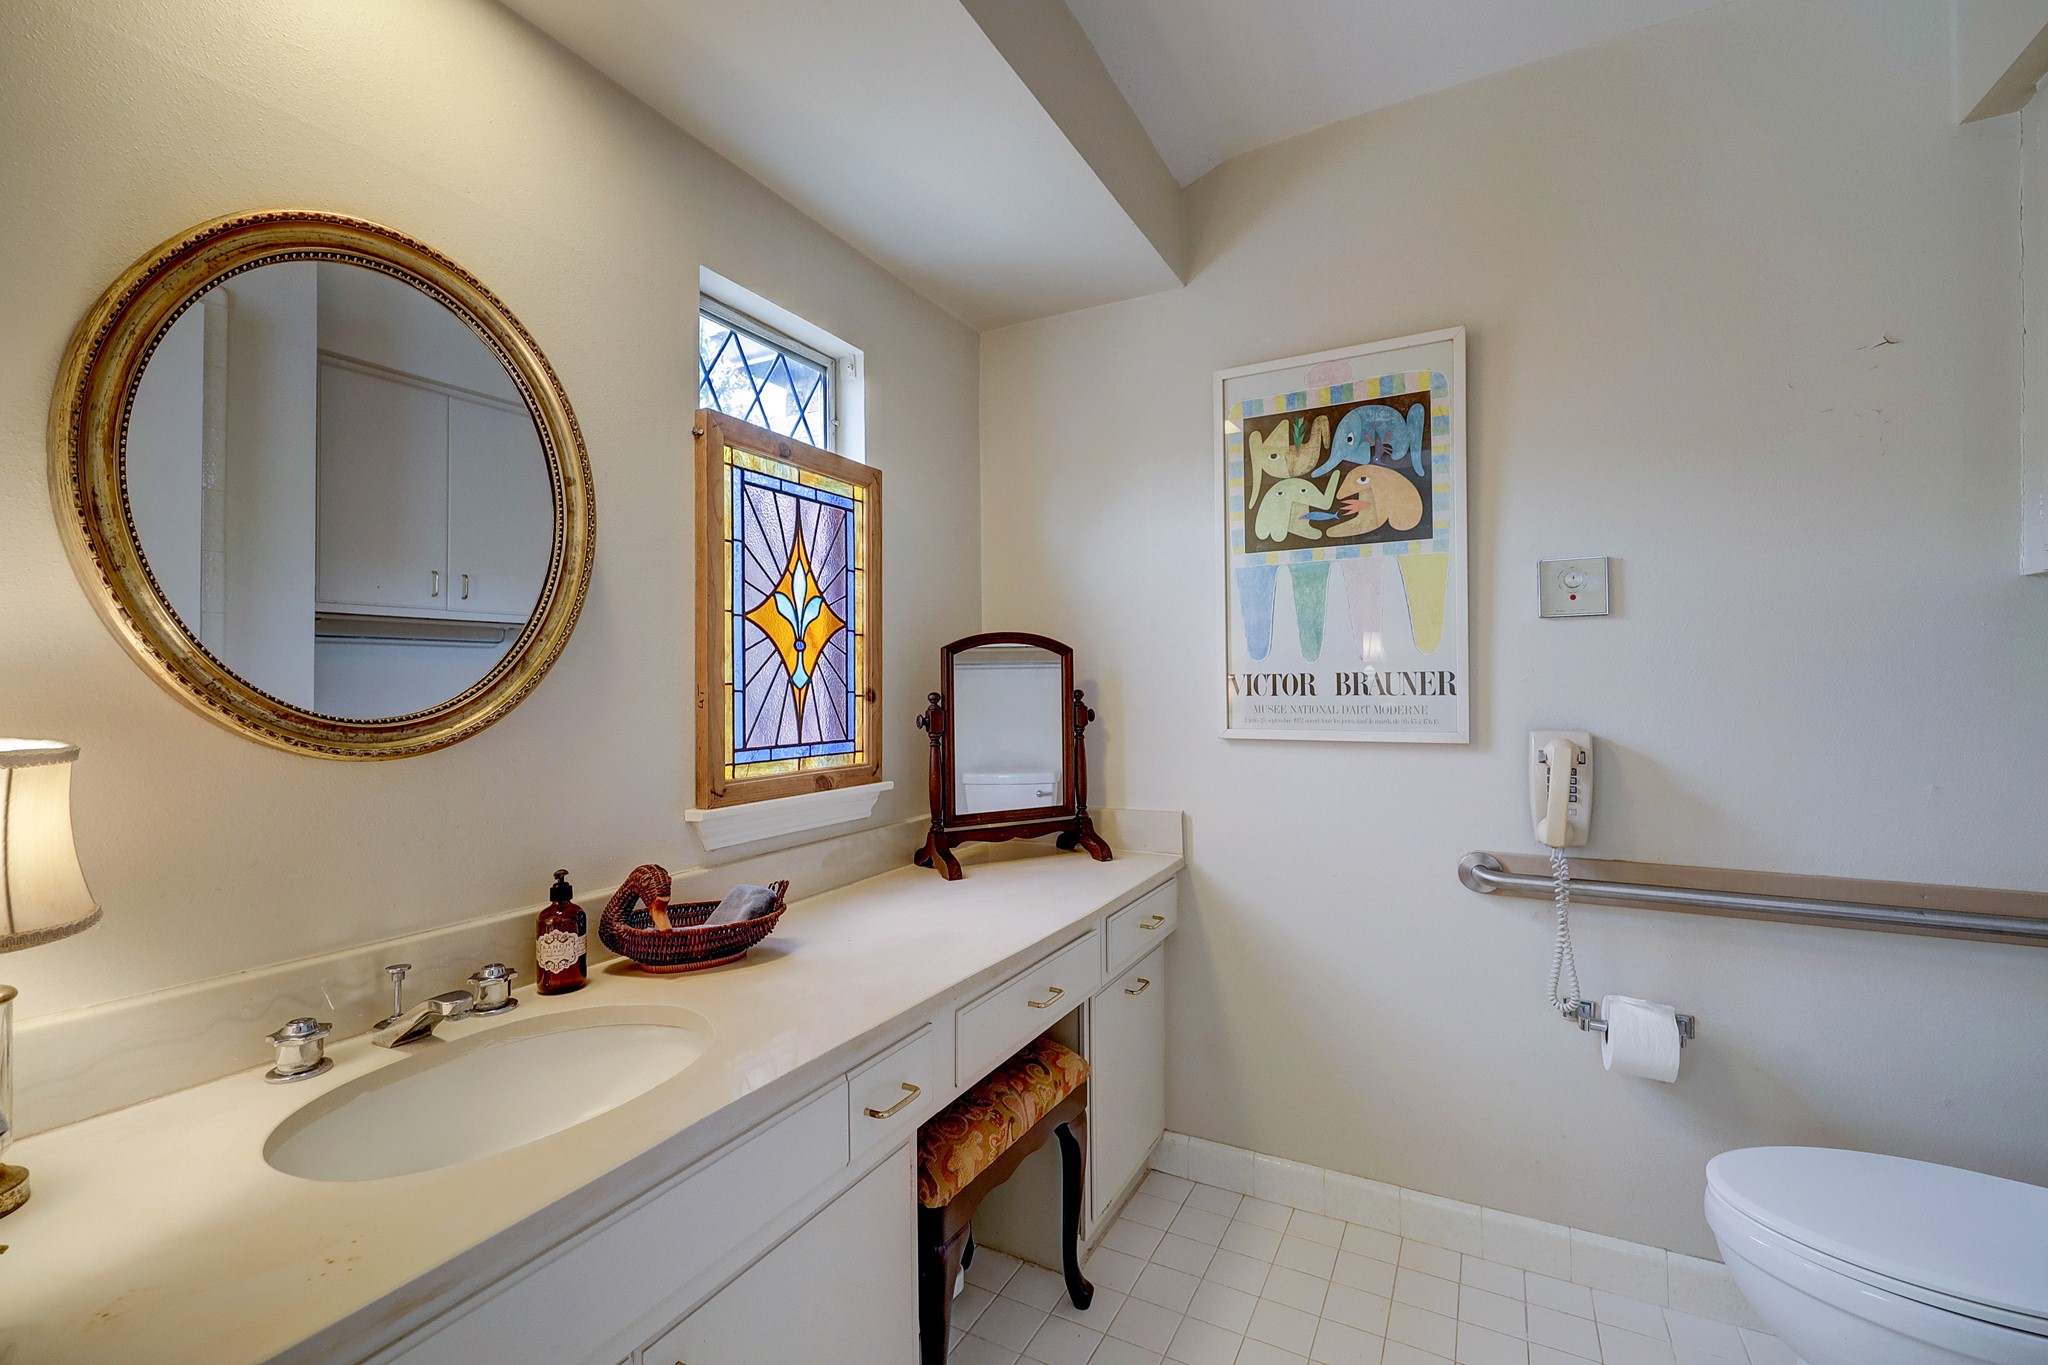 Second of the primary bathrooms. Featuring tile flooring, diamond cut glass window, and a walk-in shower.  The vanity has room to add a second sink if desired.